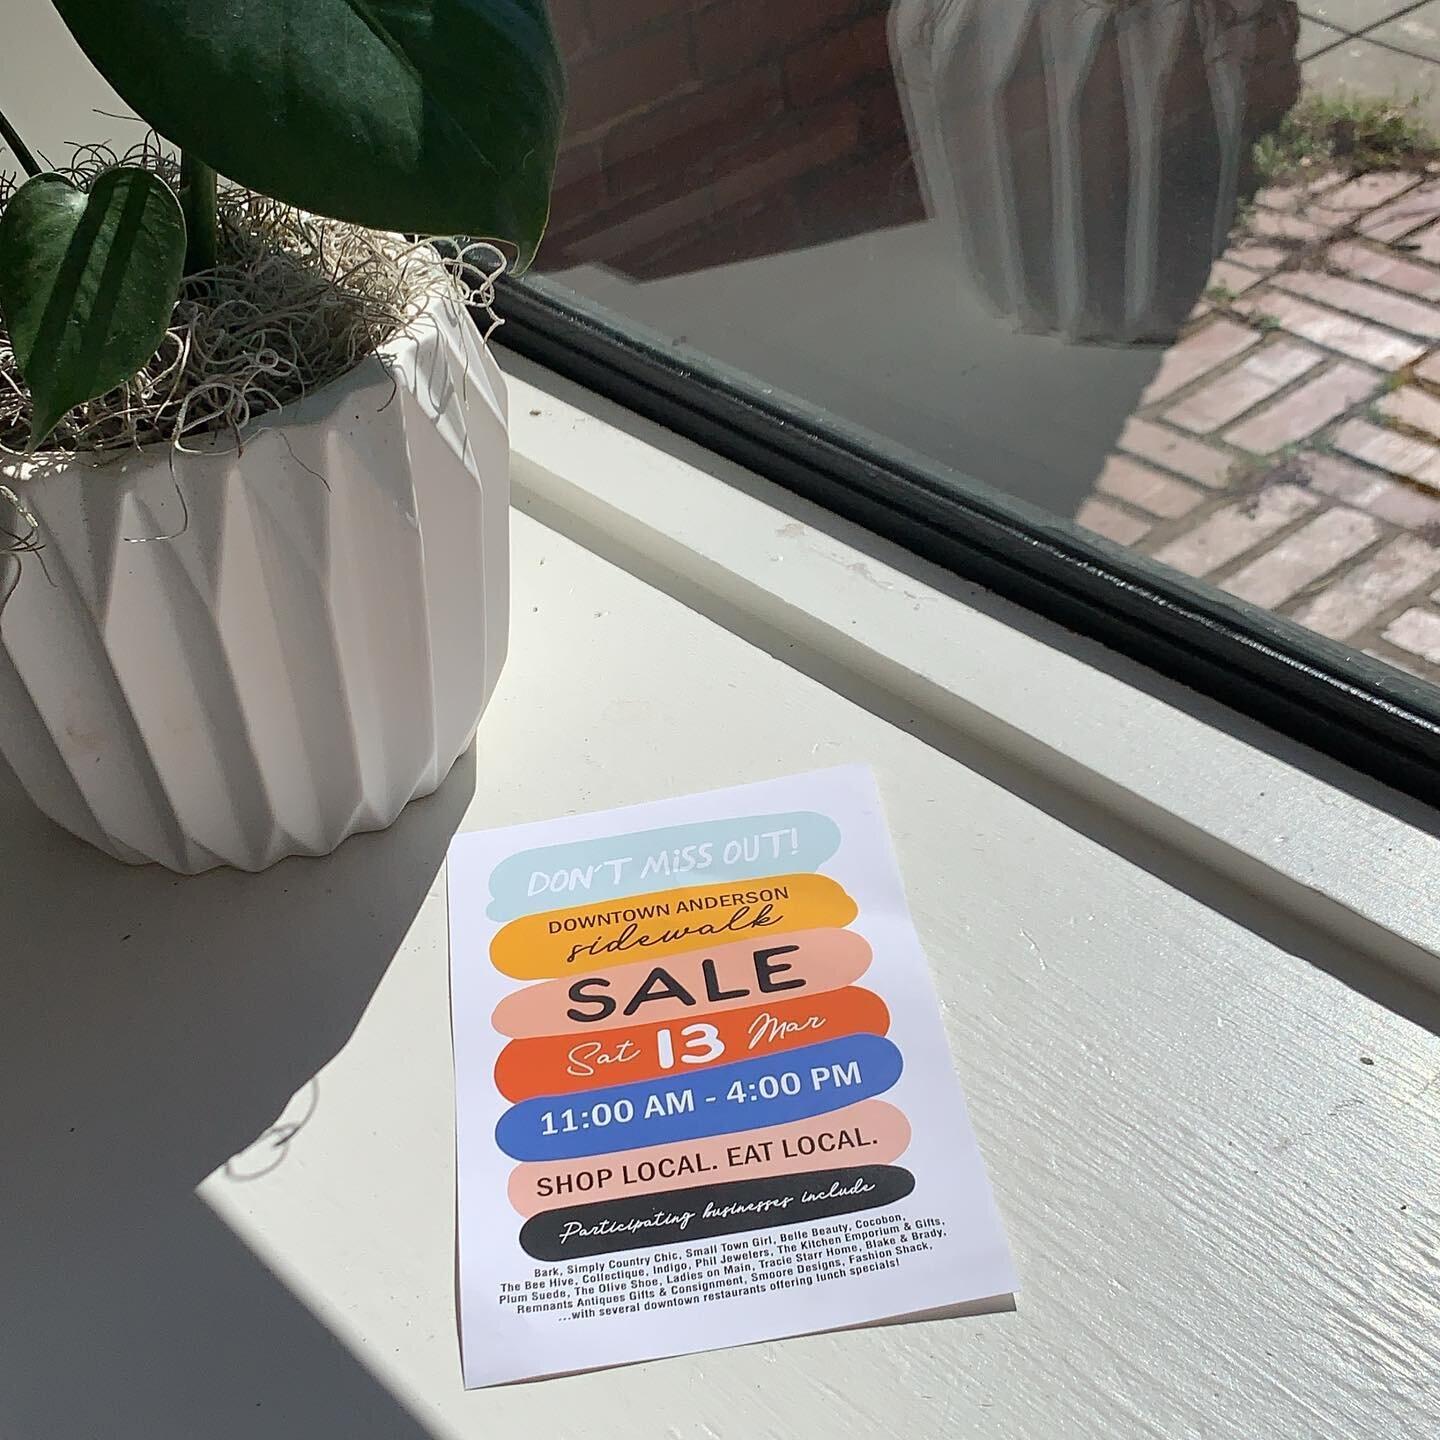 Enjoying our sunny office window and basking in our excitement about the upcoming sidewalk sale! So many of our downtown friends will be there on March 13th! 🤩🤩 #shoplocal #downtownandersonsc